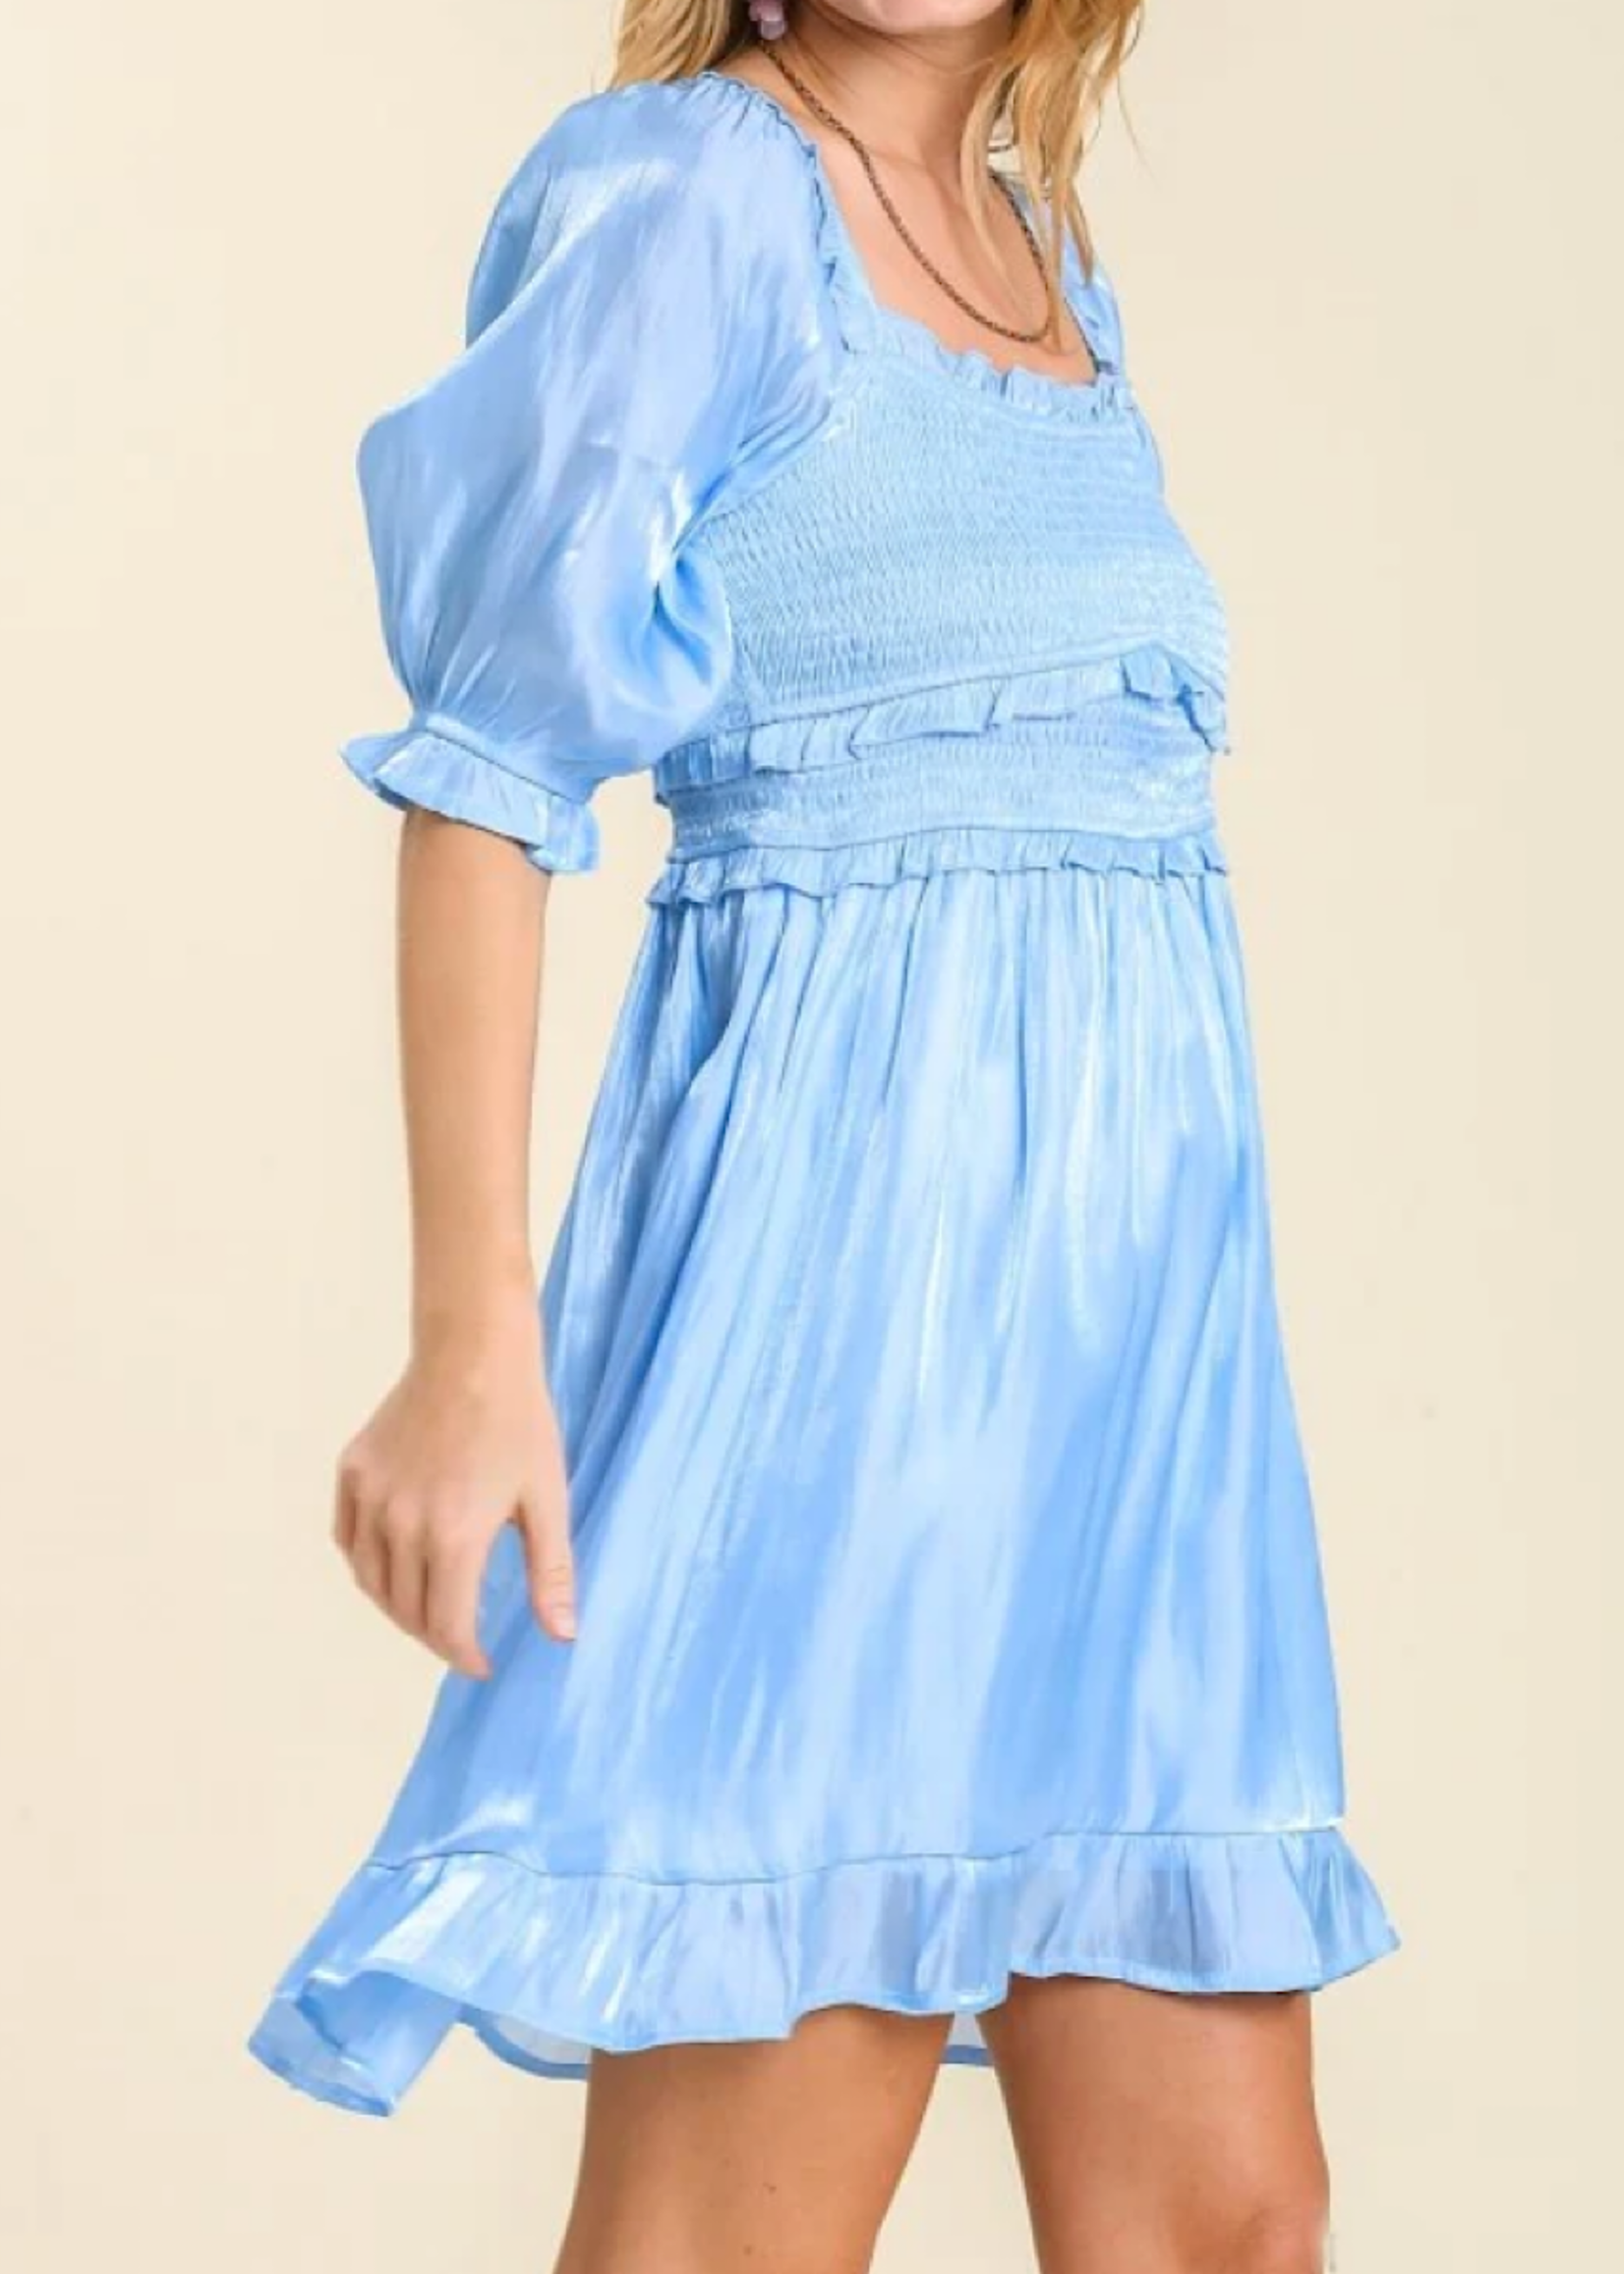 Baby Blue Smocked Dress With Ruffle Detail